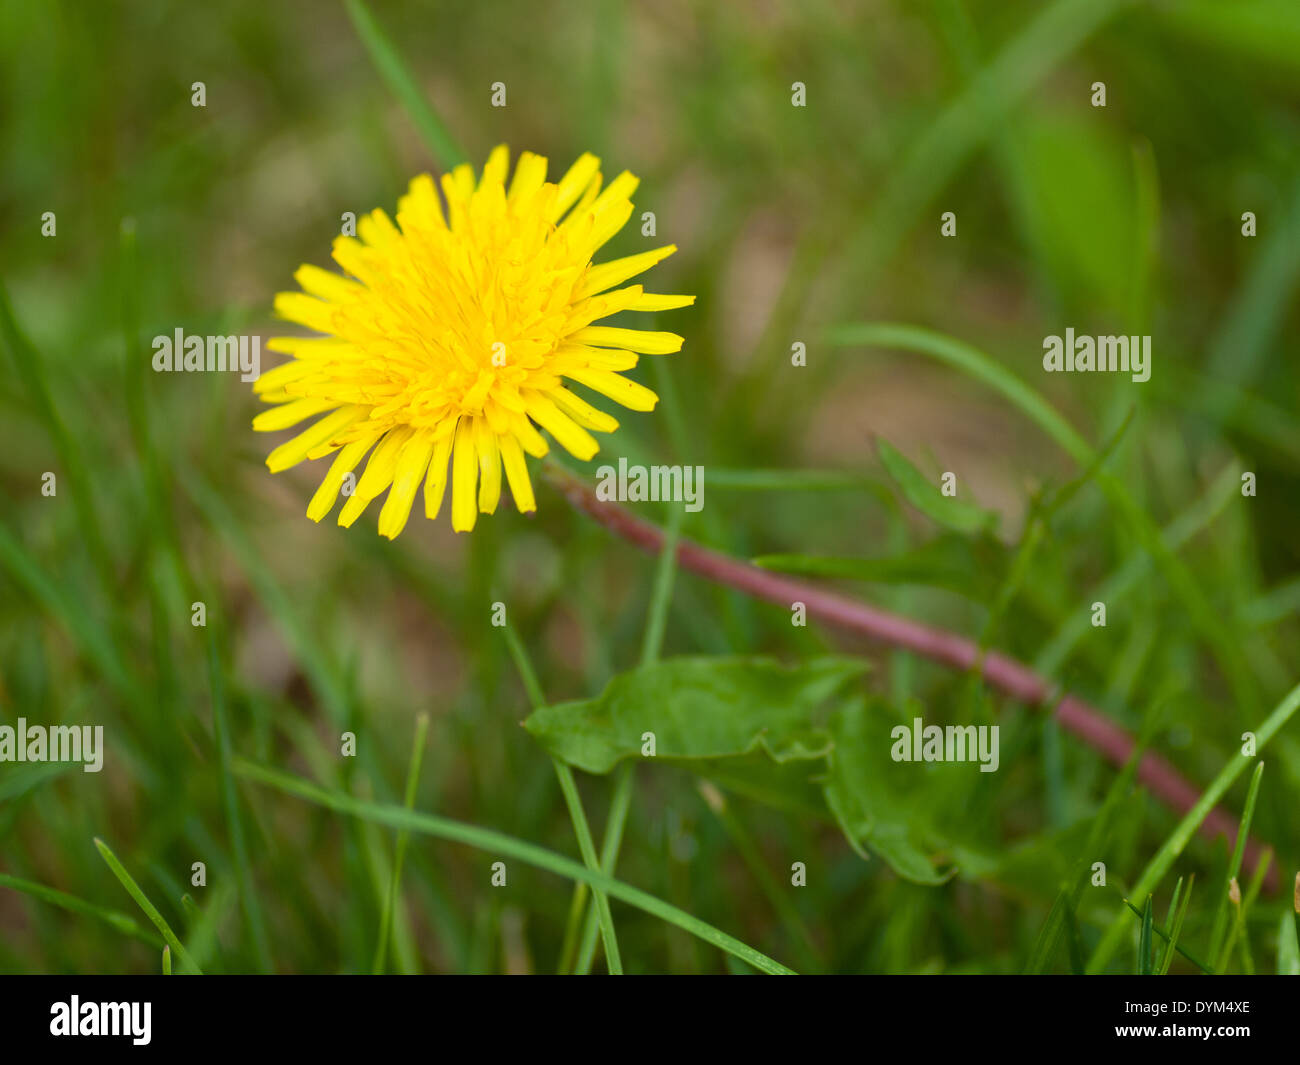 The flower of a common dandelion (Taraxacum officinale), in full bloom. Stock Photo